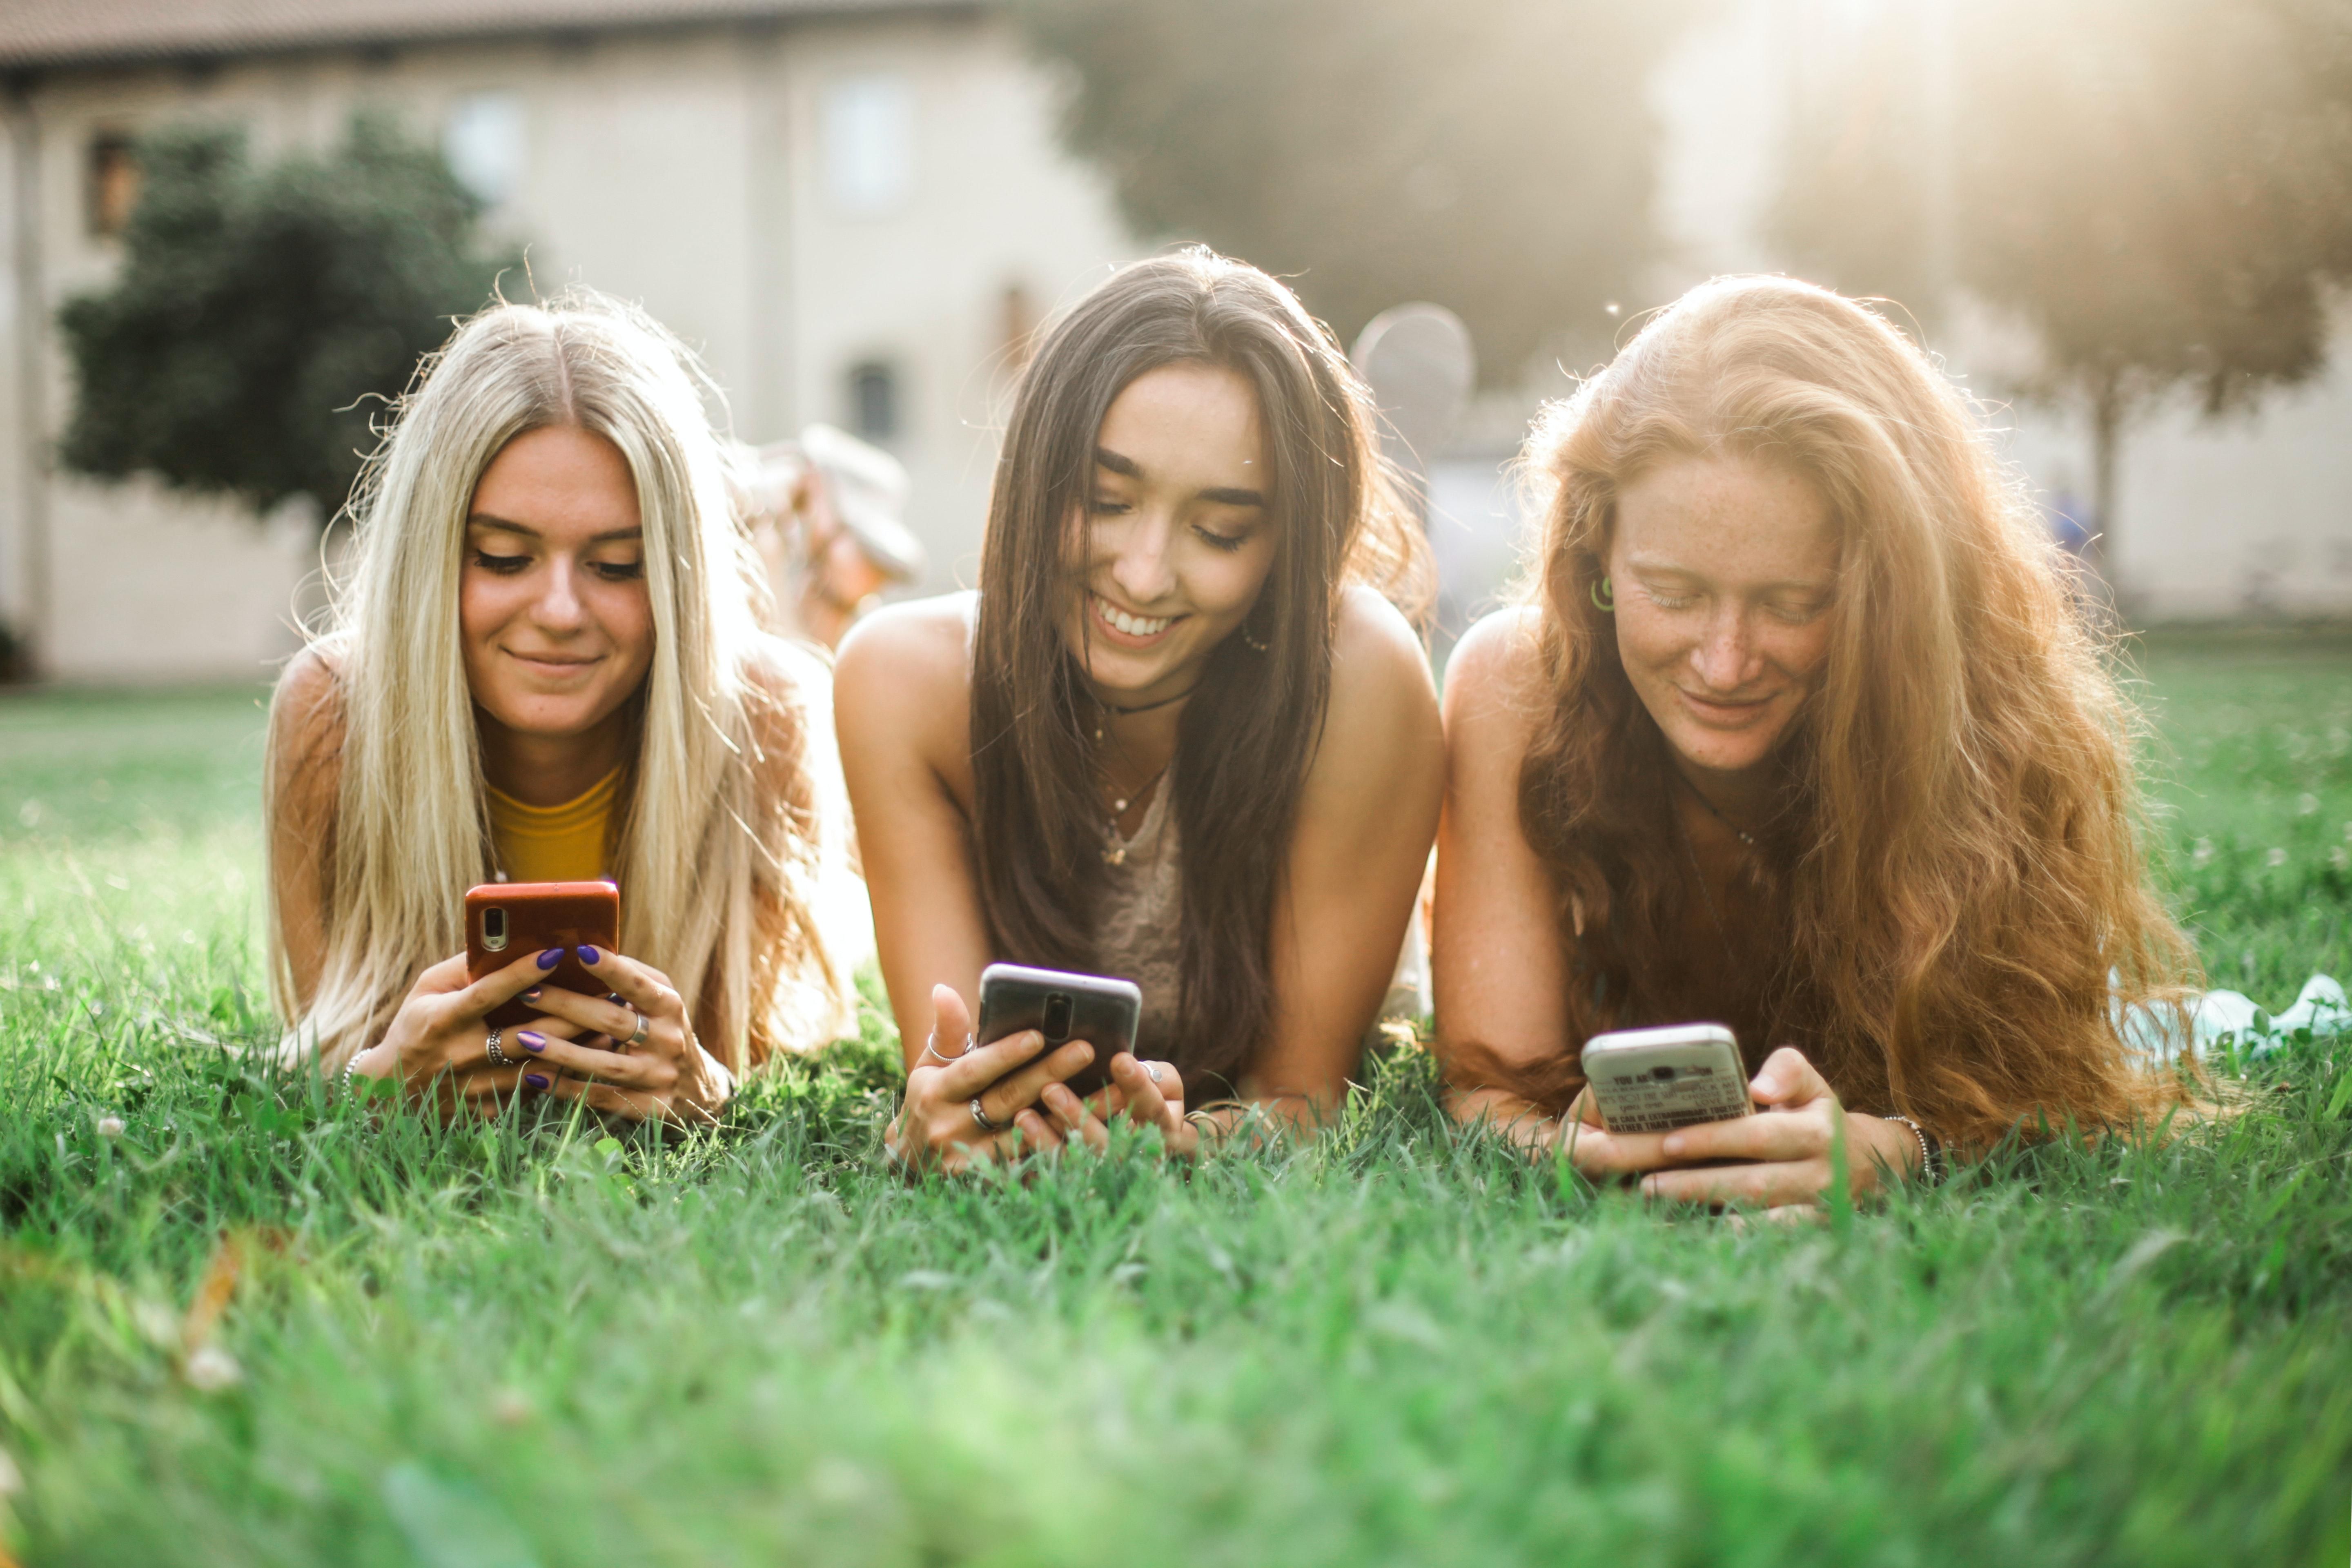 Gen Z Is The Communication Generation, And That’s A Good Thing